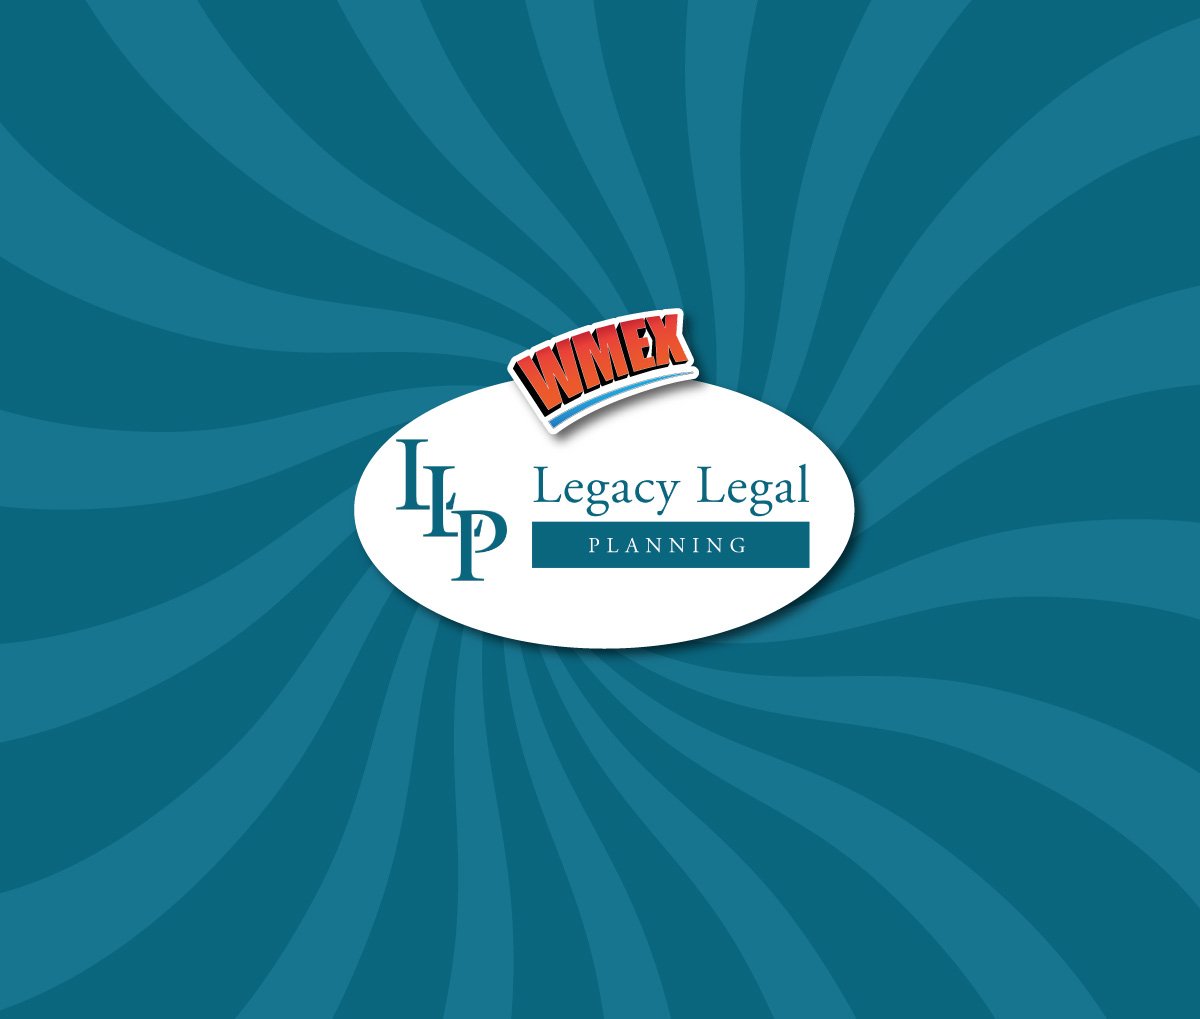 Legacy Legal Live Podcast!